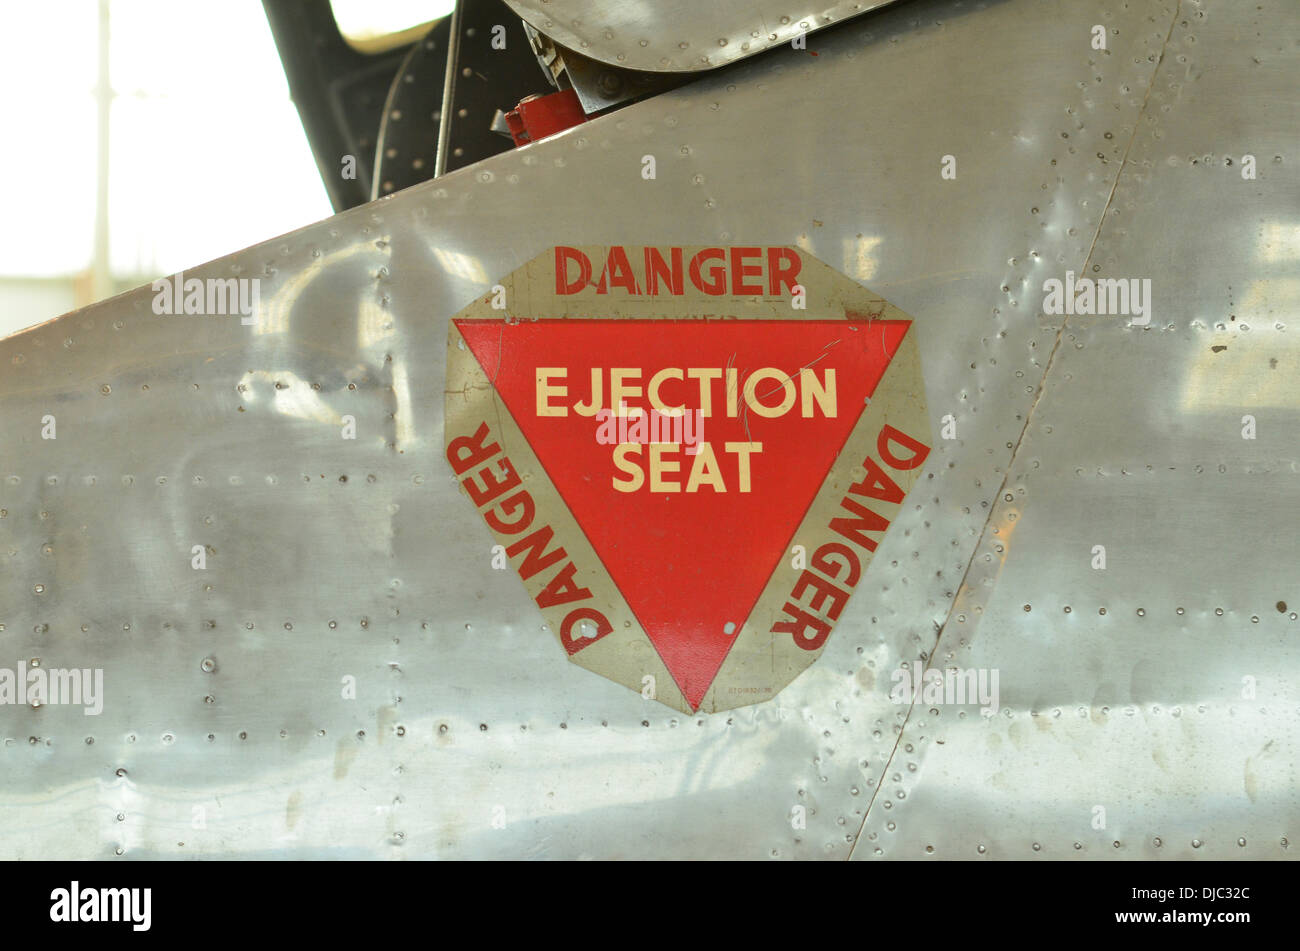 Pin DANGER EJECTION SEAT red-white triangle military fighter jet eject type